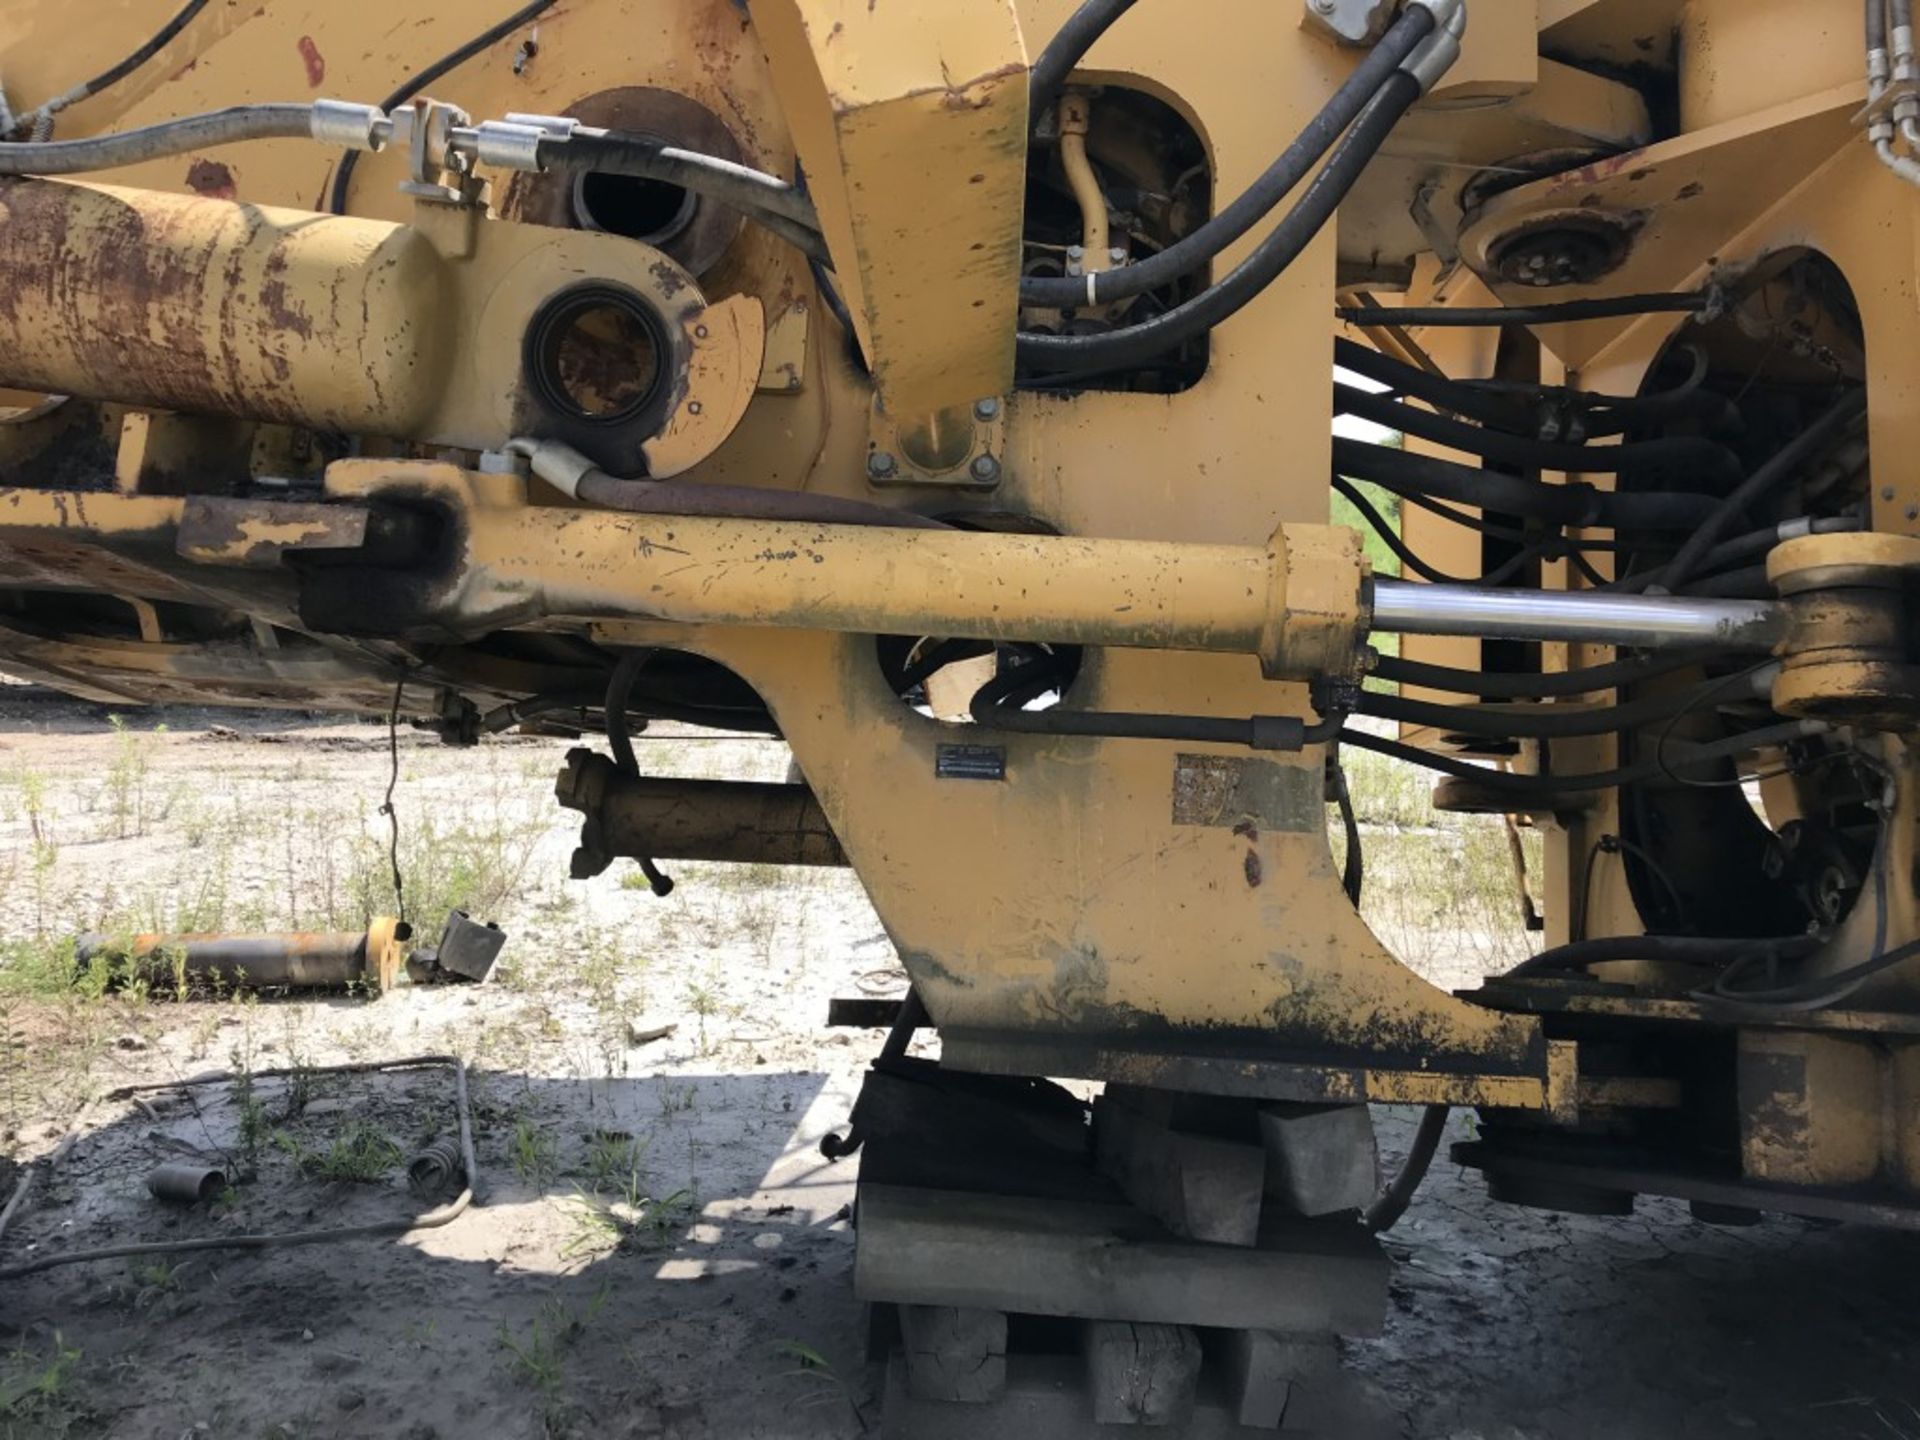 CATERPILLAR 992G WHEEL LOADER FOR PARTS, S/N: CAT0992GHADZ00520, CAT DIESEL ENGINE, MISSING A LOT OF - Image 6 of 15